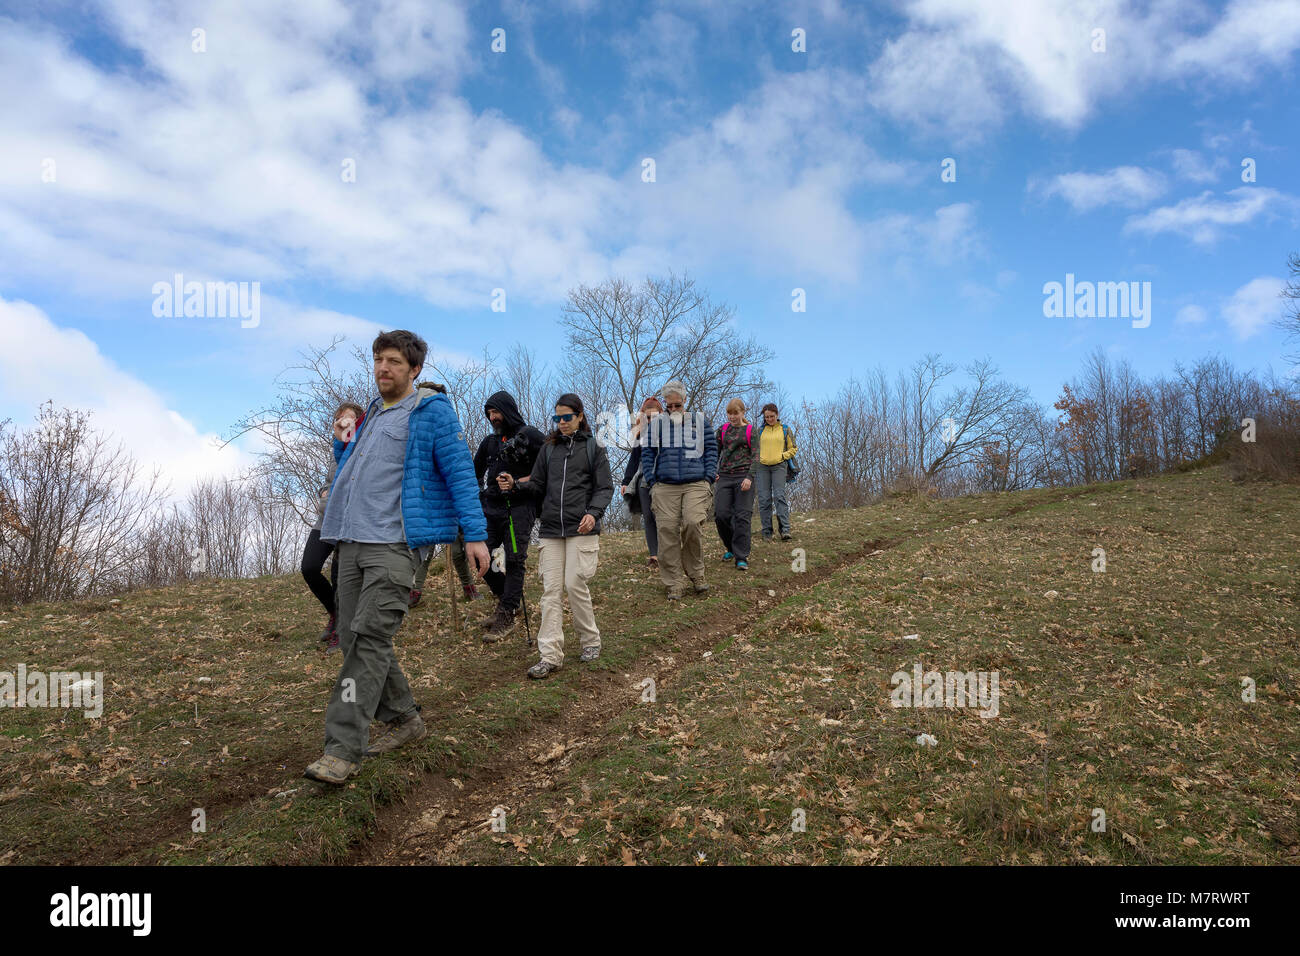 Monte San Giovanni in Sabina, Italy - March 10, 2018: A group of hikers explore mountain paths, among oak and holm oak woods. Stock Photo